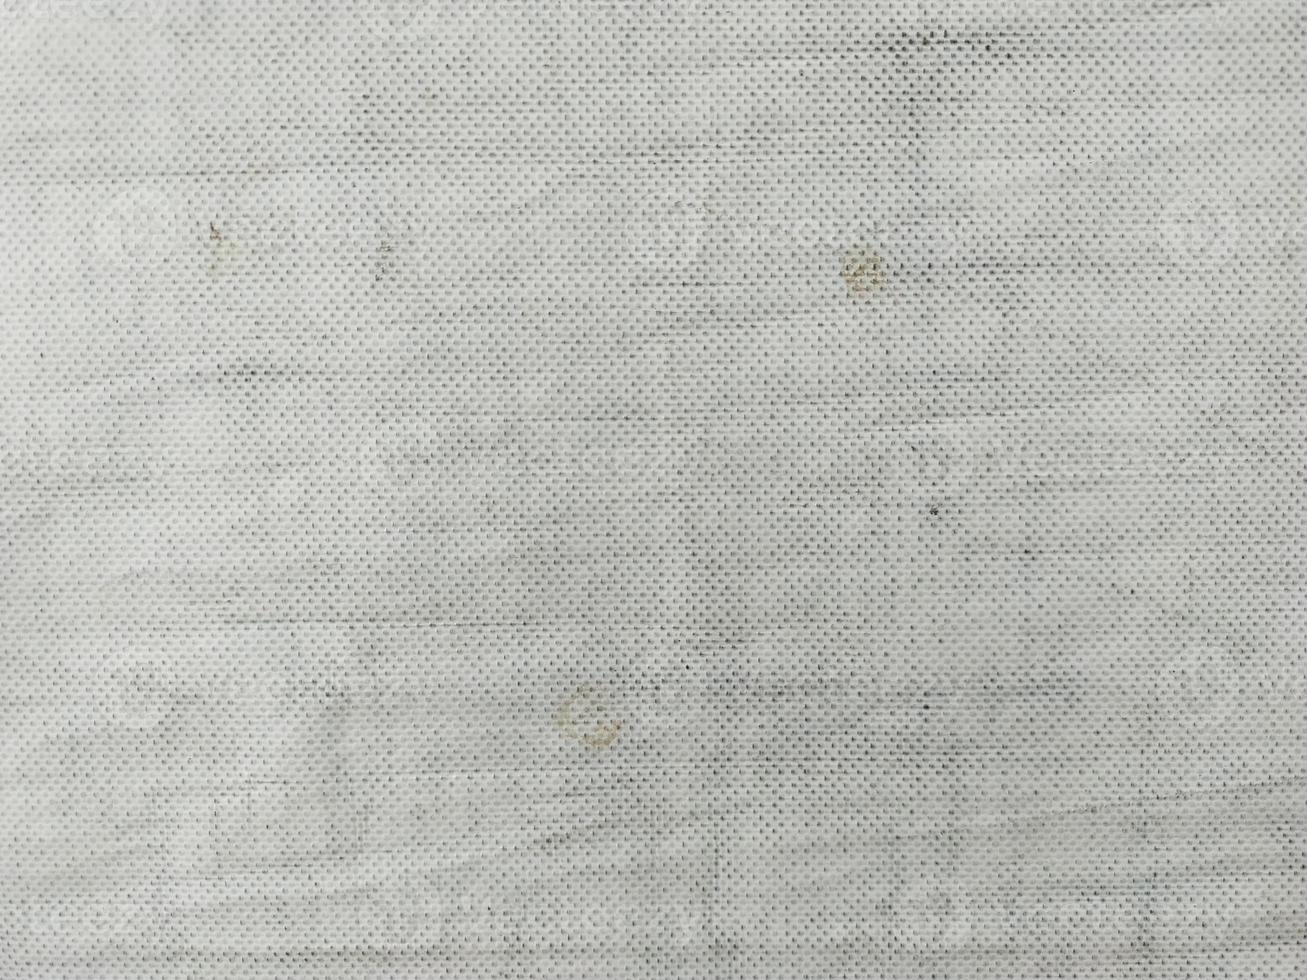 Close-up of Rustic Old Fabric Natural Linen Texture Background. Grunge white background photo